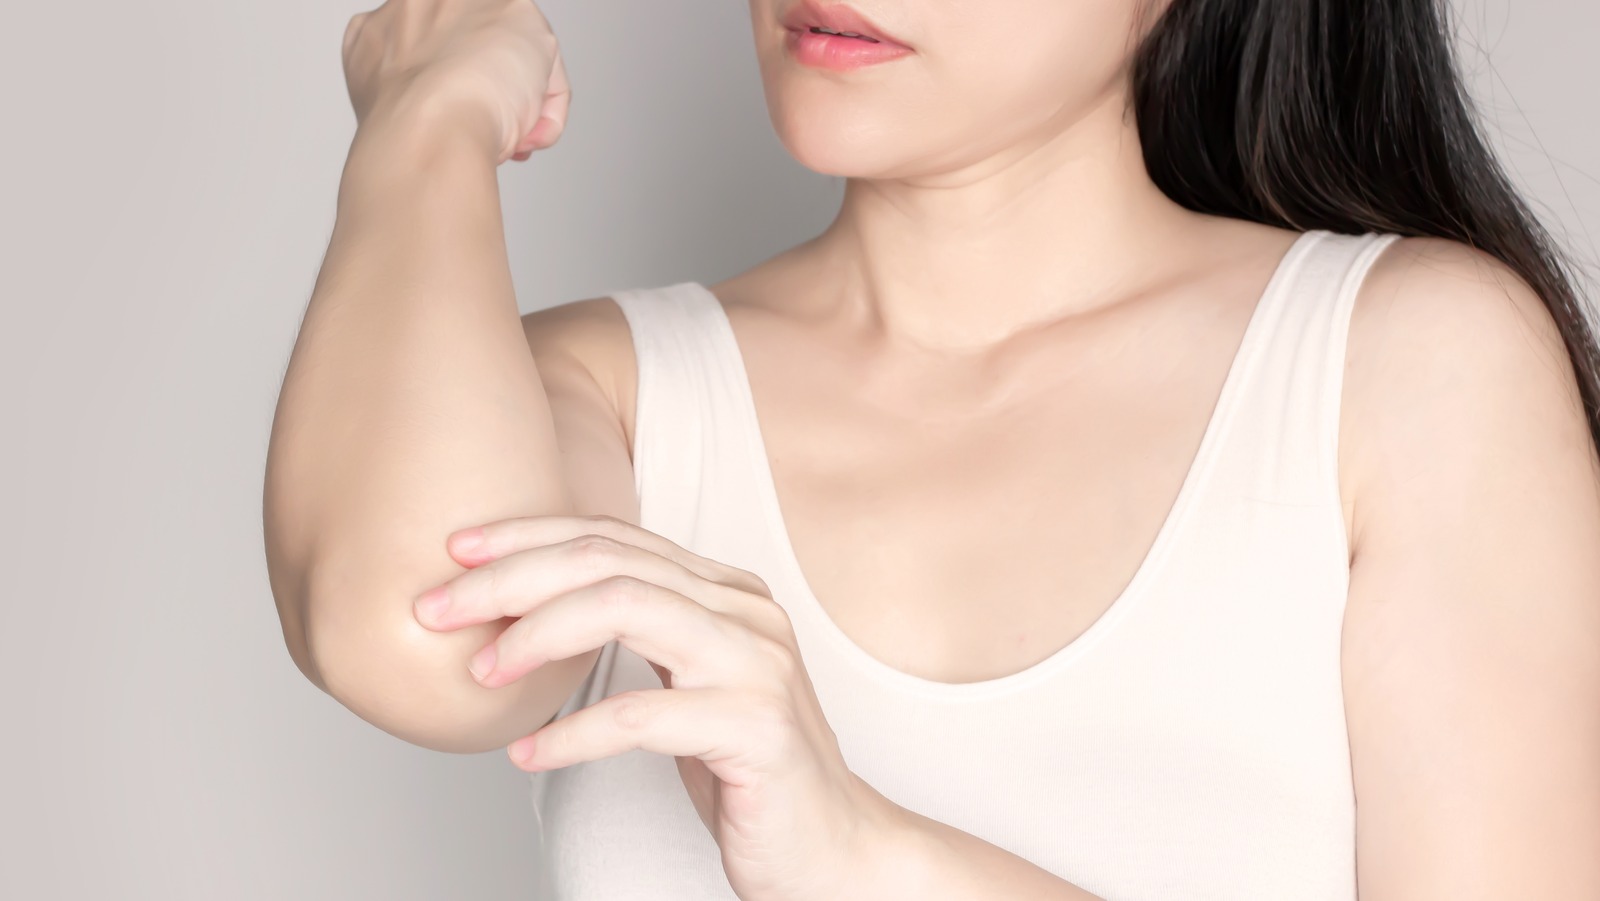 Do This With Your Elbows For A Better Poop - Health Digest